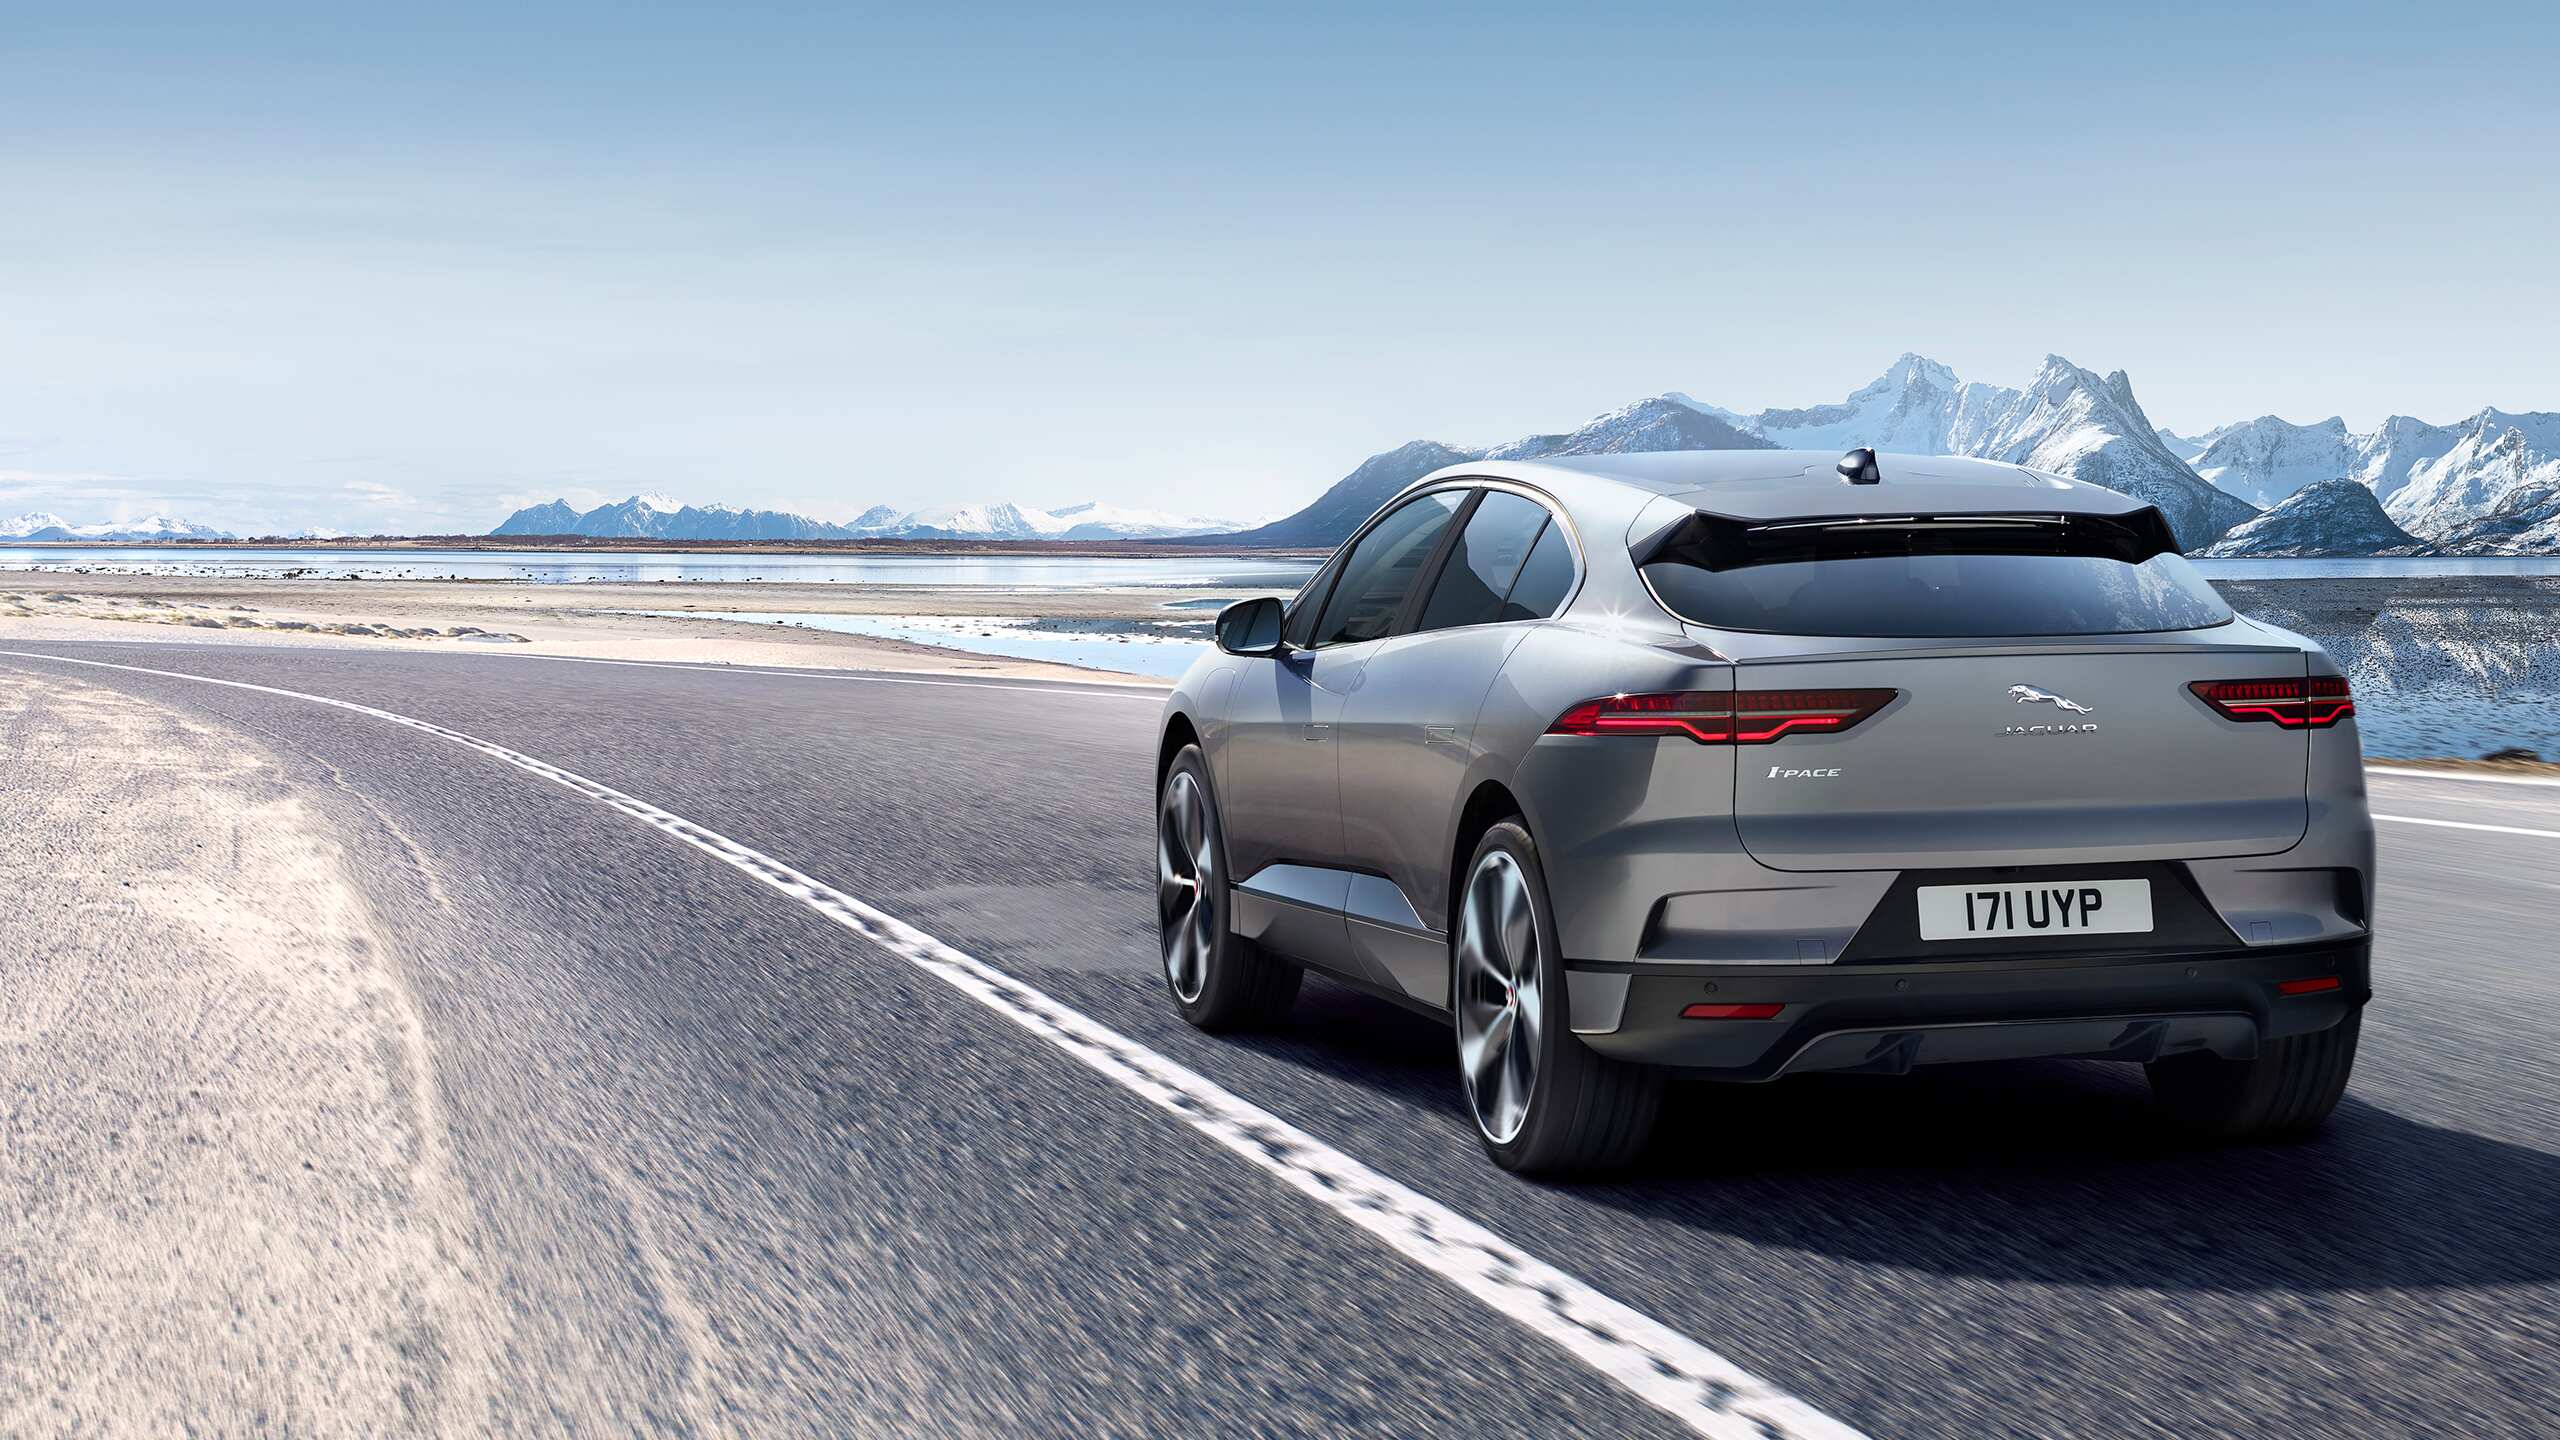 Jaguar I-Pace running on the road and with ice mountain background 